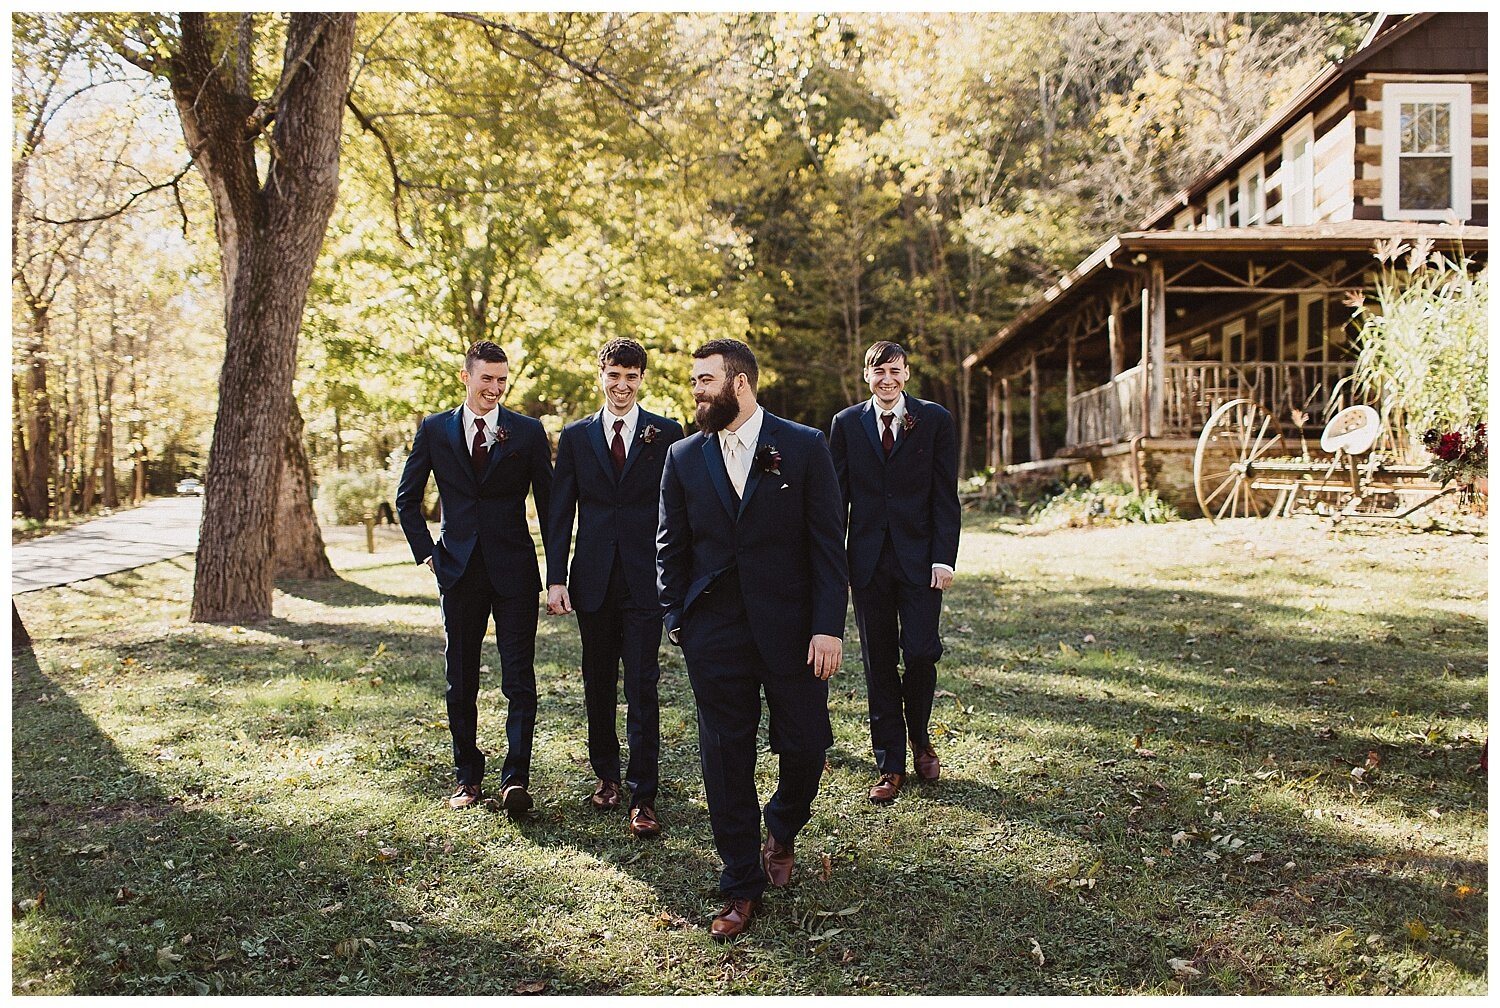 the groom and groomsmen at The Old Barn at Brown County wedding venue